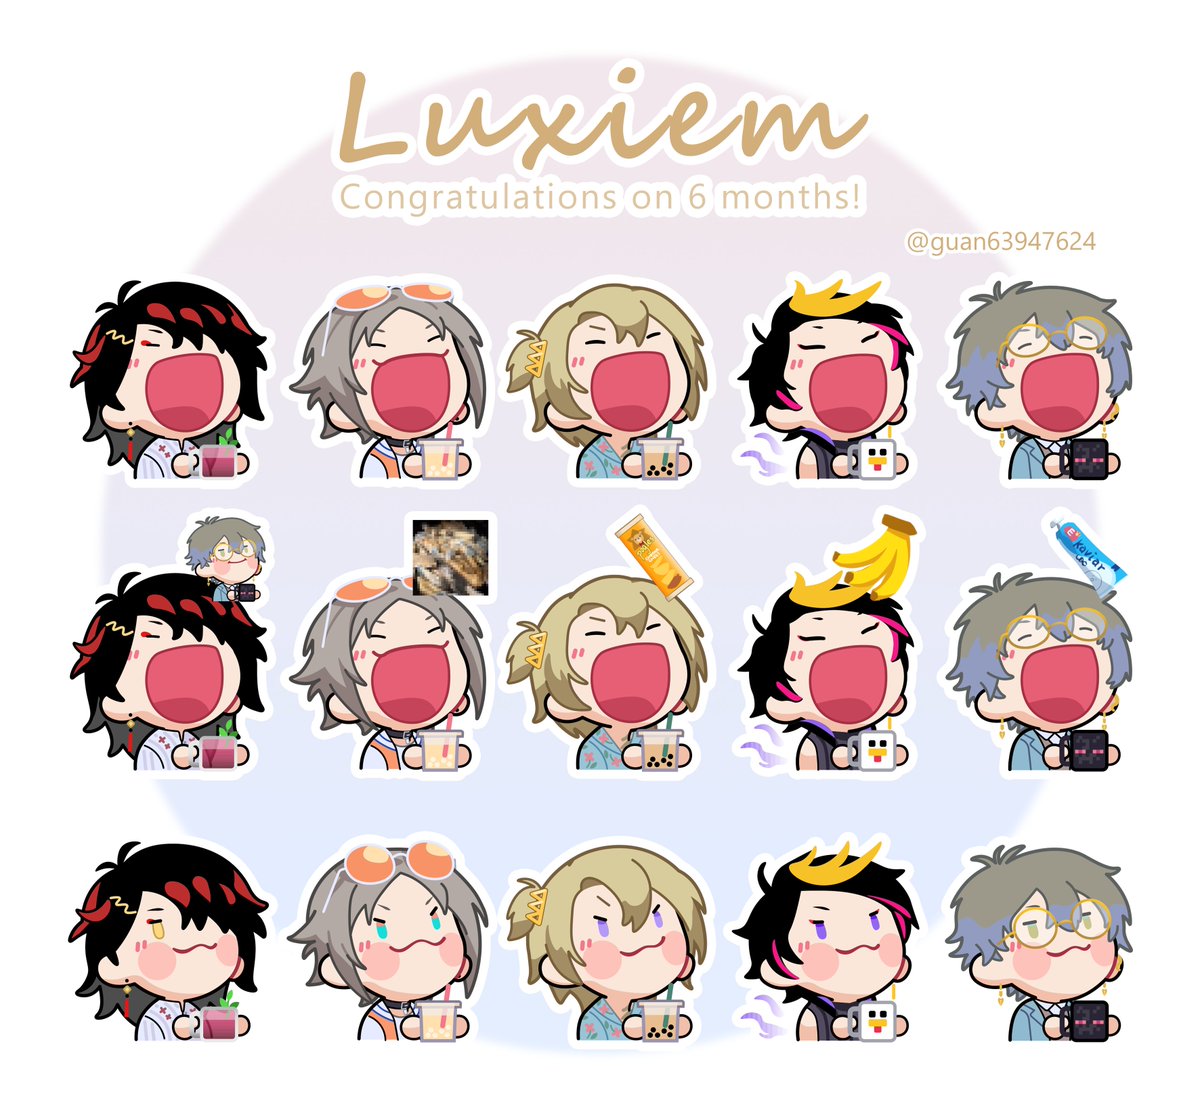 HAPPY 6 MONTHS MA KINGS!!❤️🧡💛💜💙
Here’s Luxiem chibis for stream fugi and recycle bin  icons for Windows<3
😎download link: drive.google.com/drive/folders/…

#Akumassets #Akurylic #RiAssets #MystArt #lucadeezhands #drawluca #StreamEyysets #YaminoArt #Graphike #Ikenography